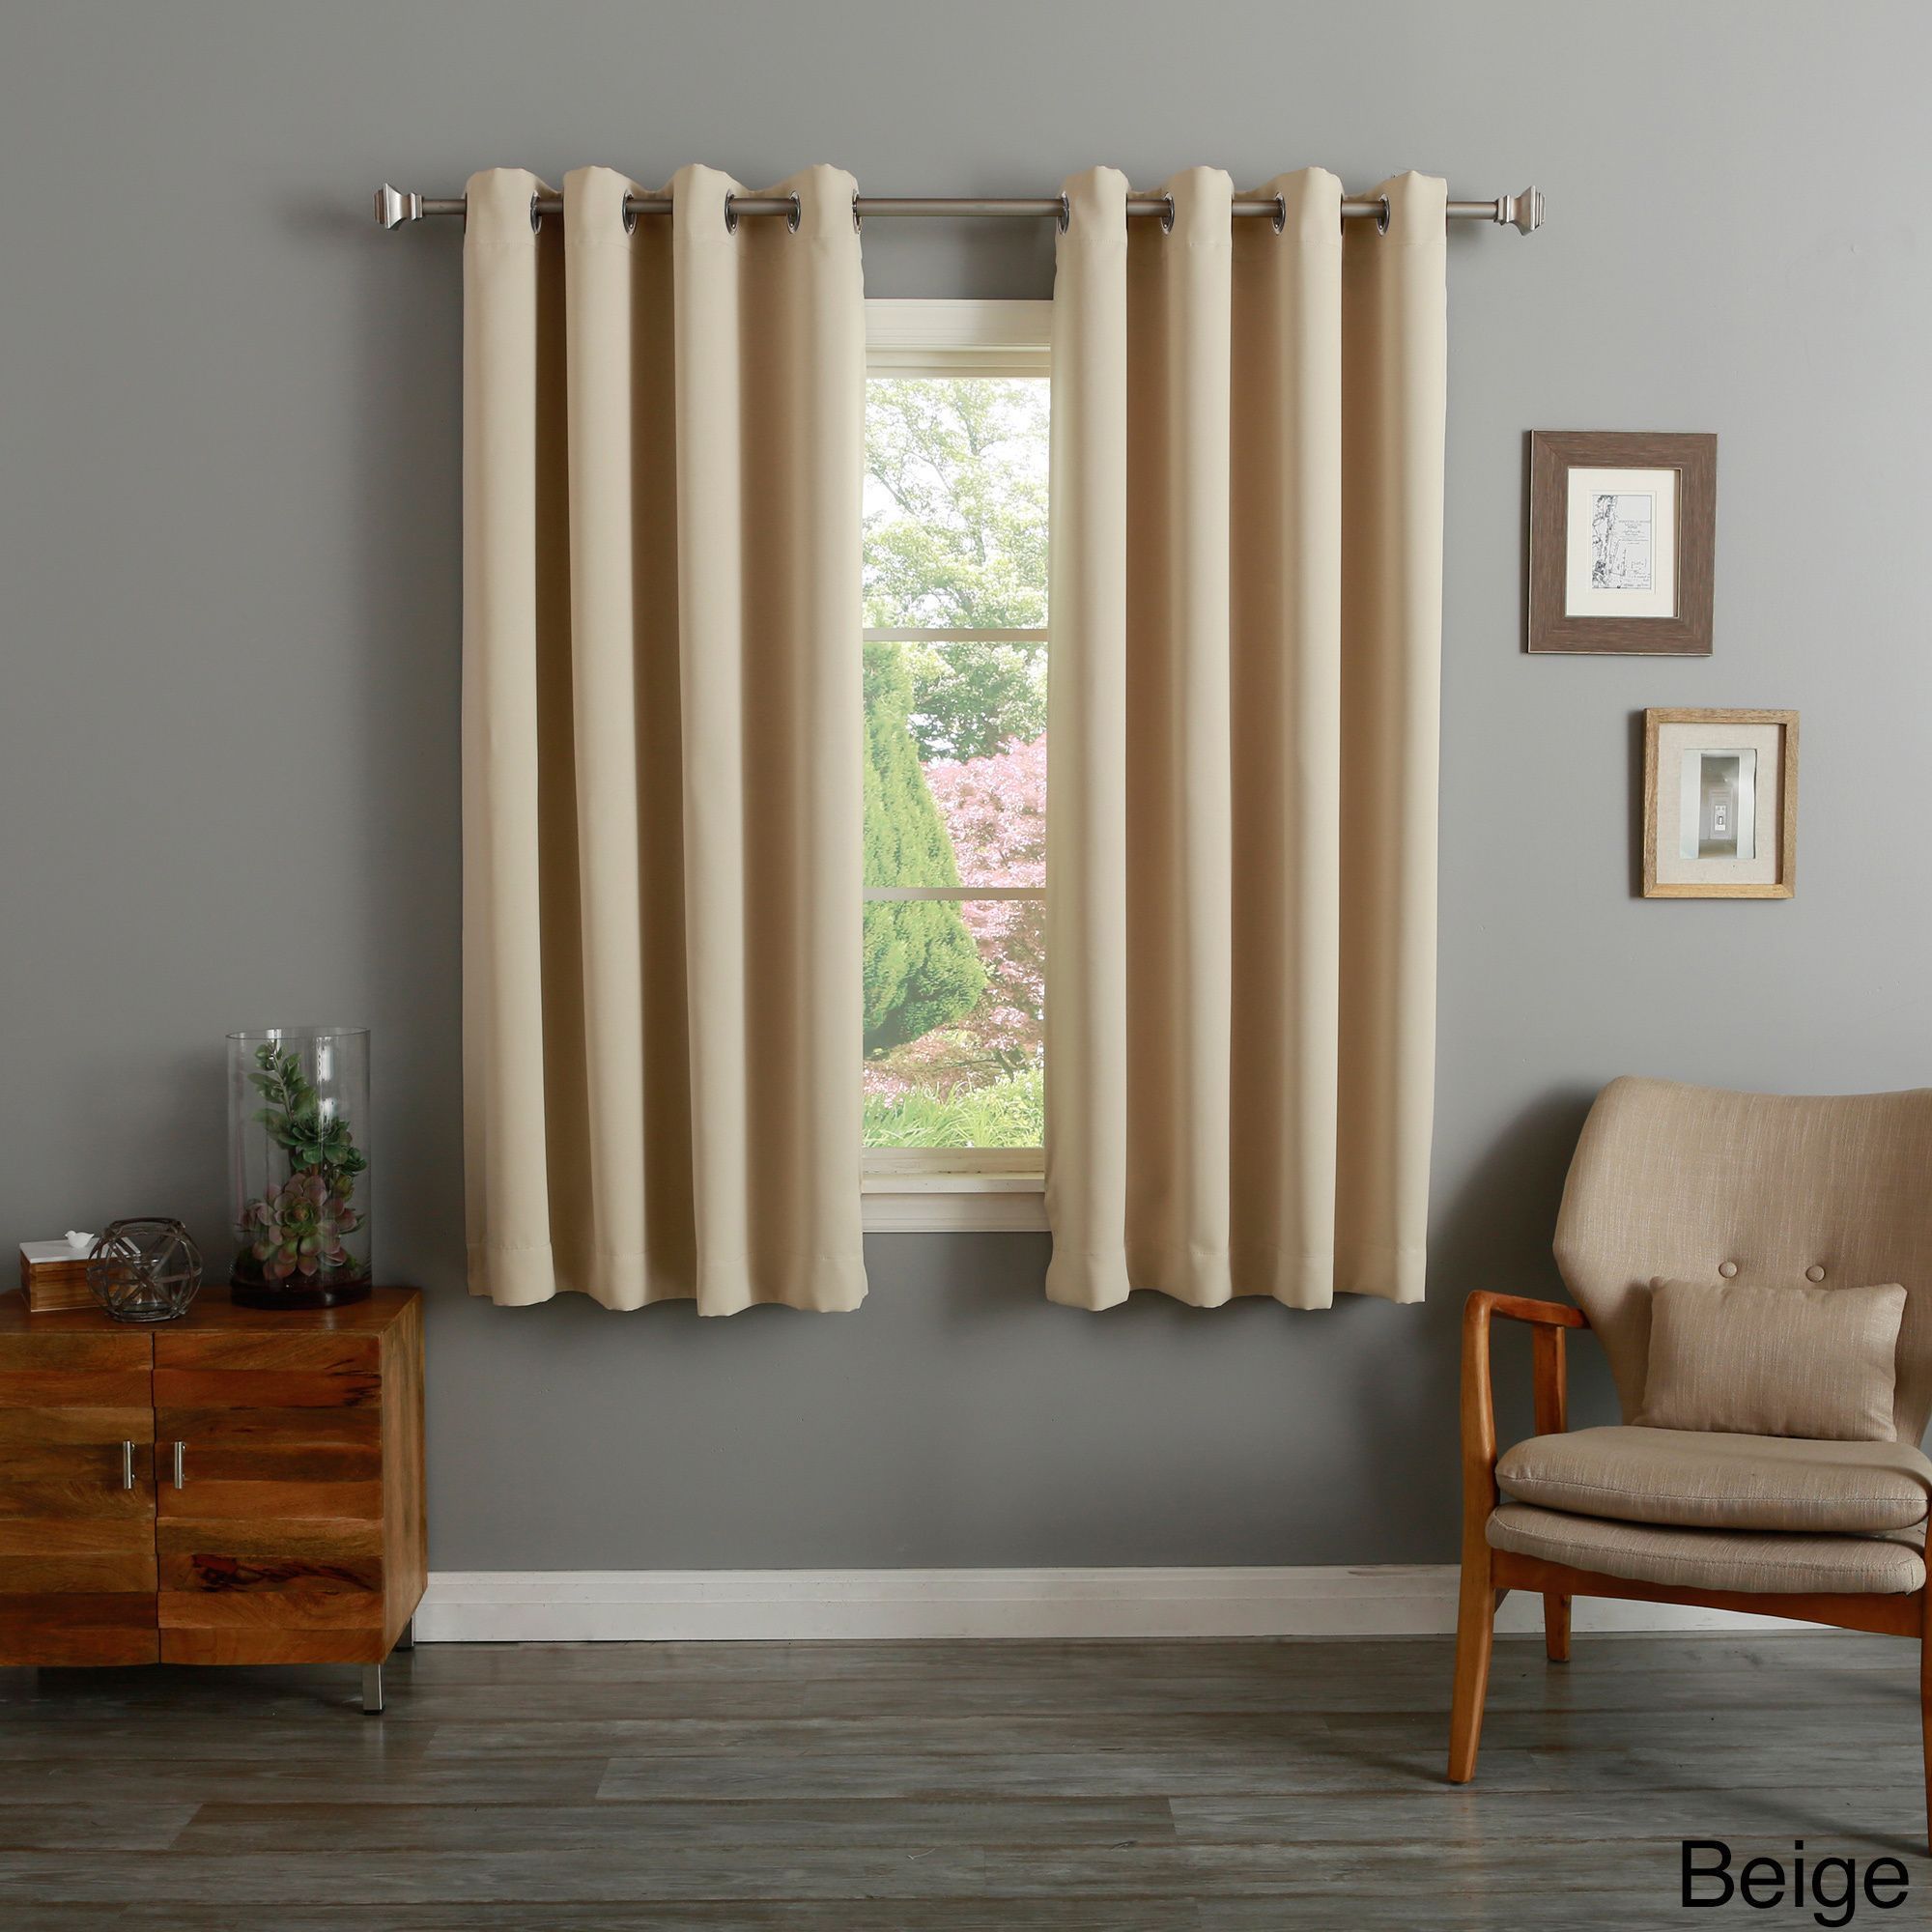 Aurora Home Silver Grommet Top Thermal Insulated 63 Inch With Regard To Antique Silver Grommet Top Thermal Insulated Blackout Curtain Panel Pairs (View 15 of 20)